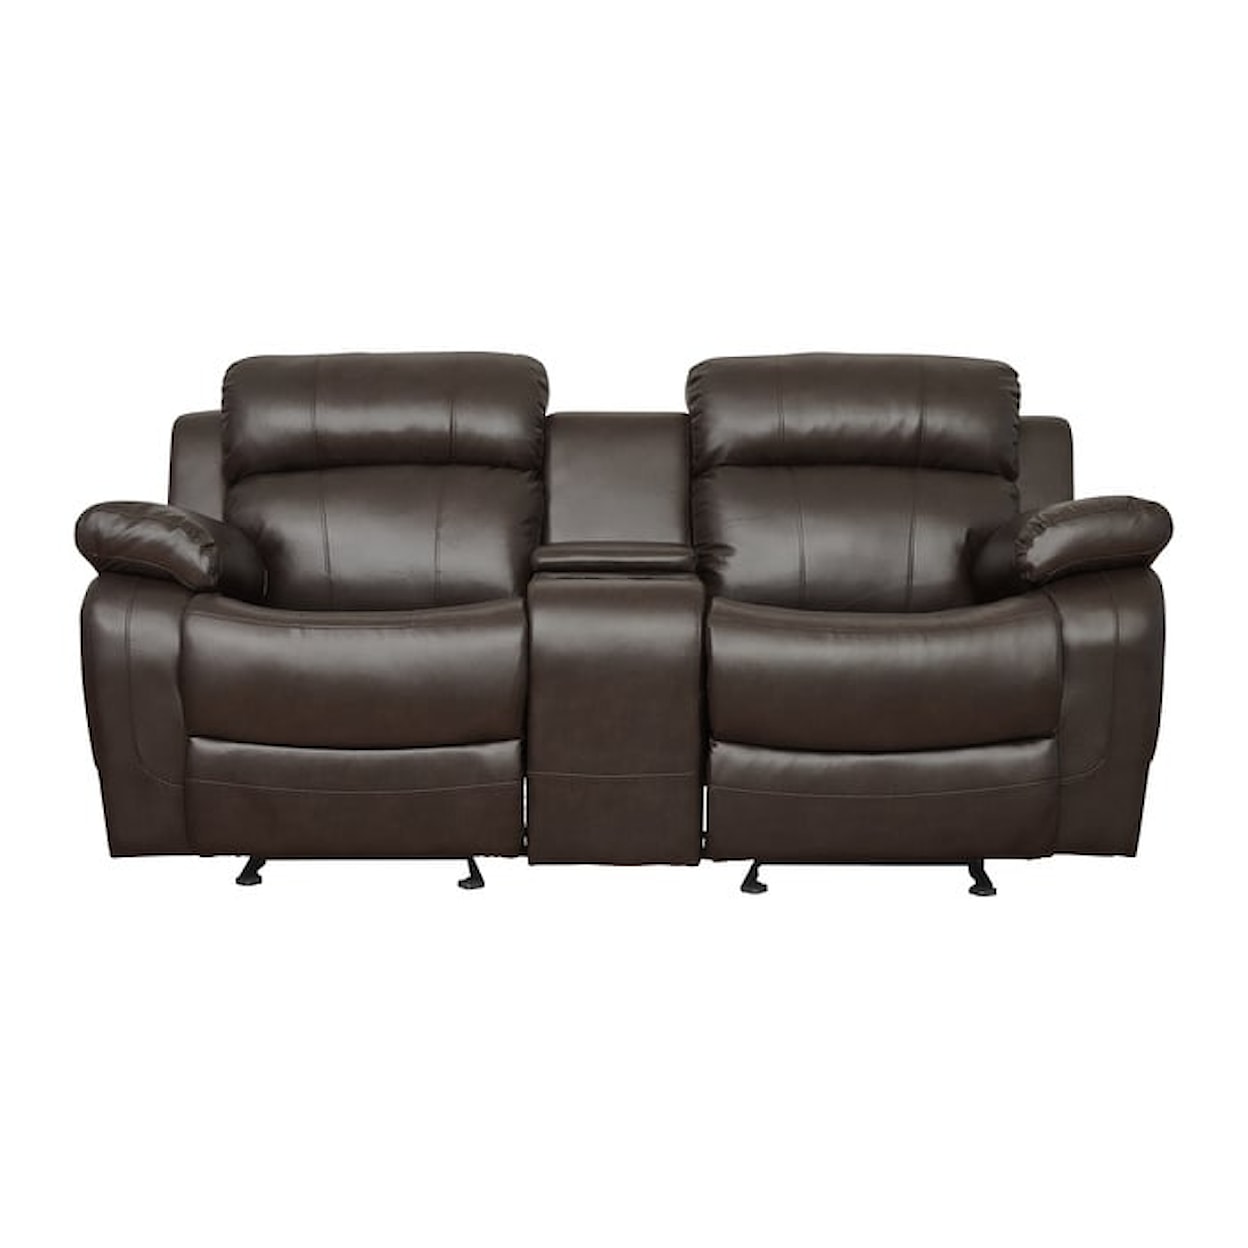 Homelegance Furniture Marille Double Glider Reclining Loveseat